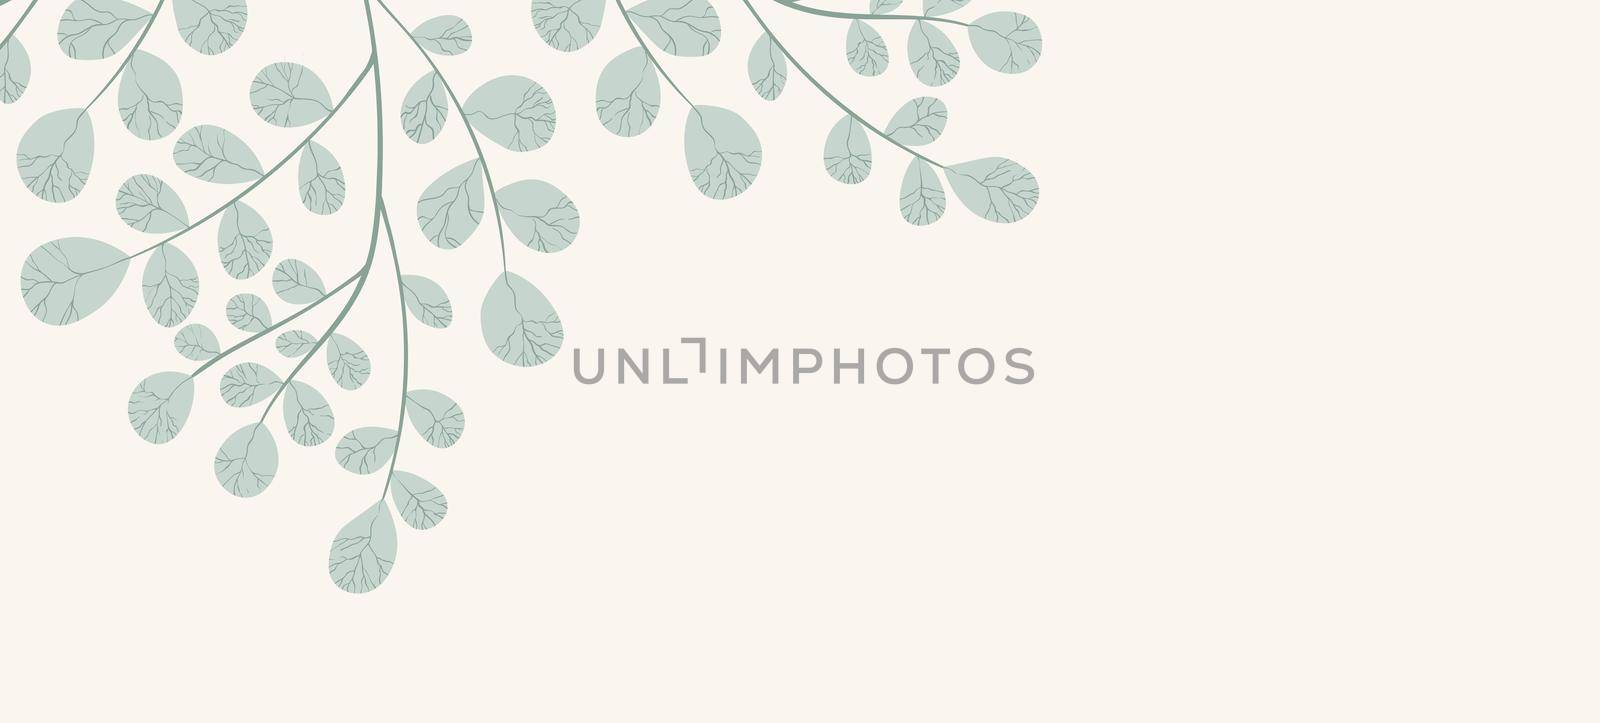 Floral web banner with drawn color exotic monstera leaves. Nature concept design. Modern floral compositions with summer branches. Vector illustration on the theme of ecology, natura, environment.